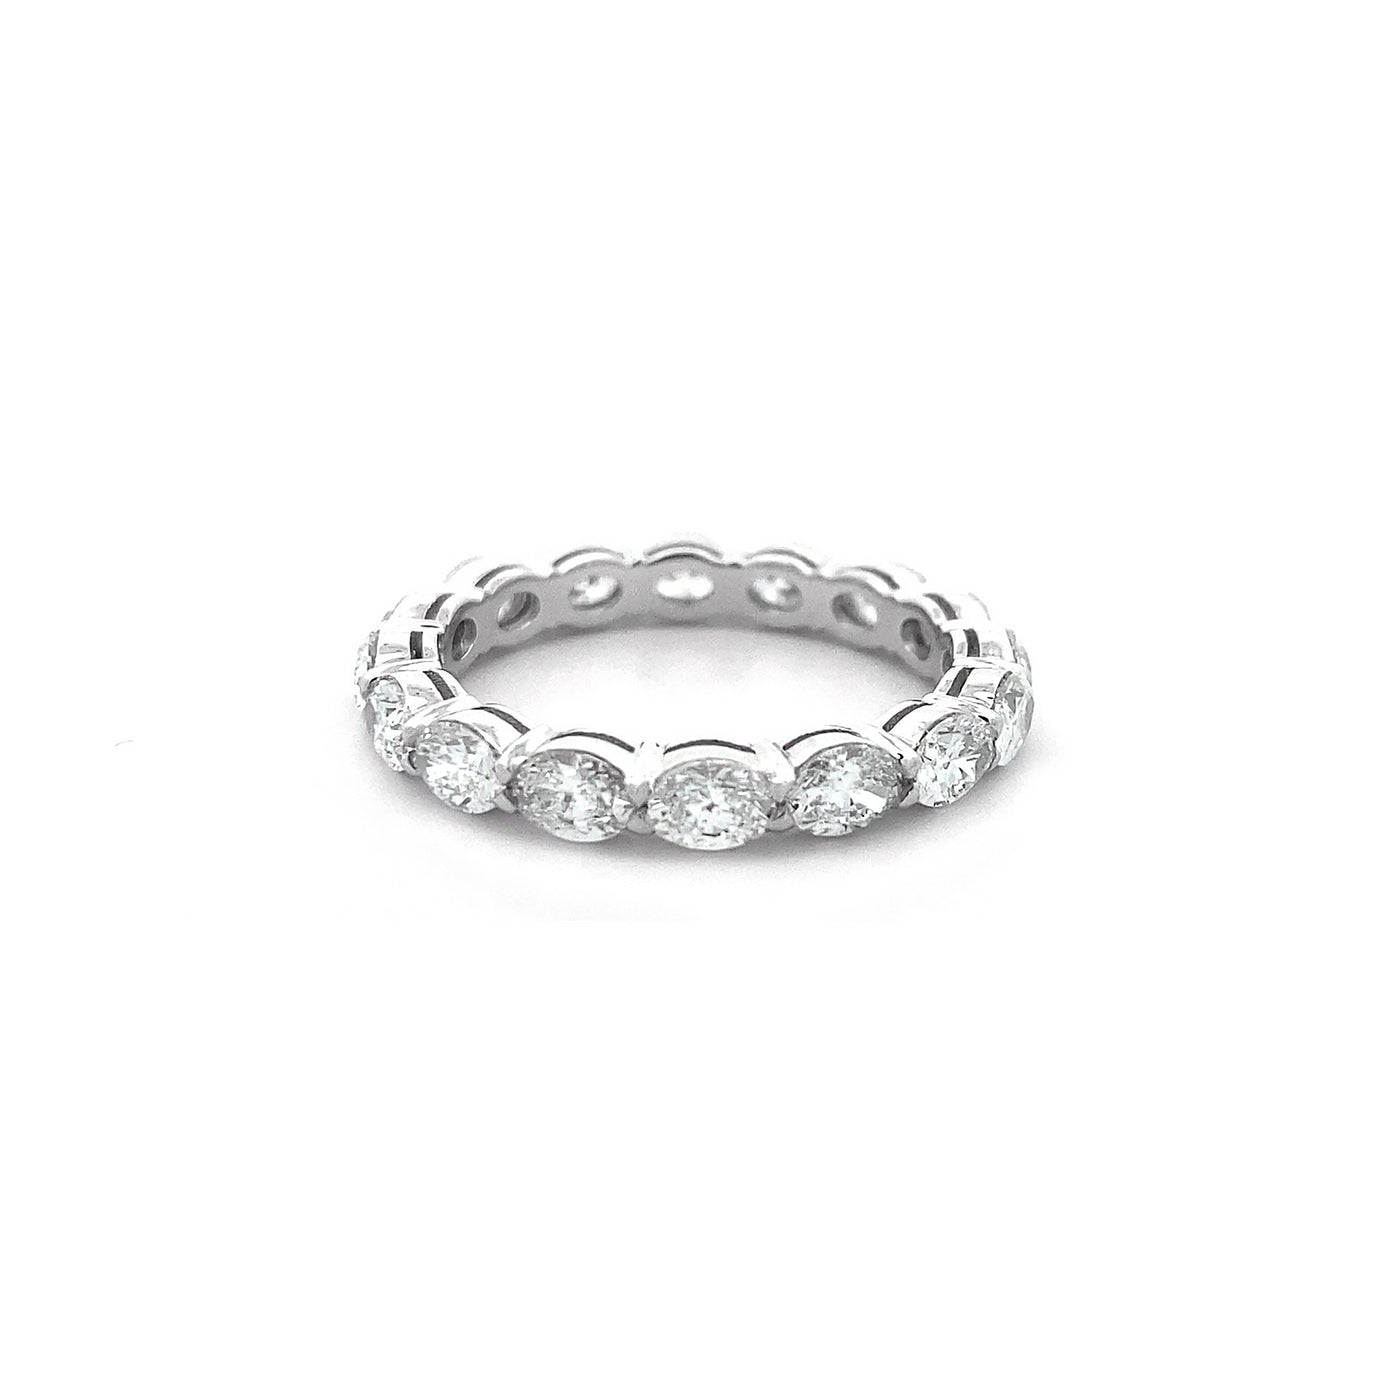 East-West Oval Cut Diamond Eternity Ring in Platinum | 2.21ctw